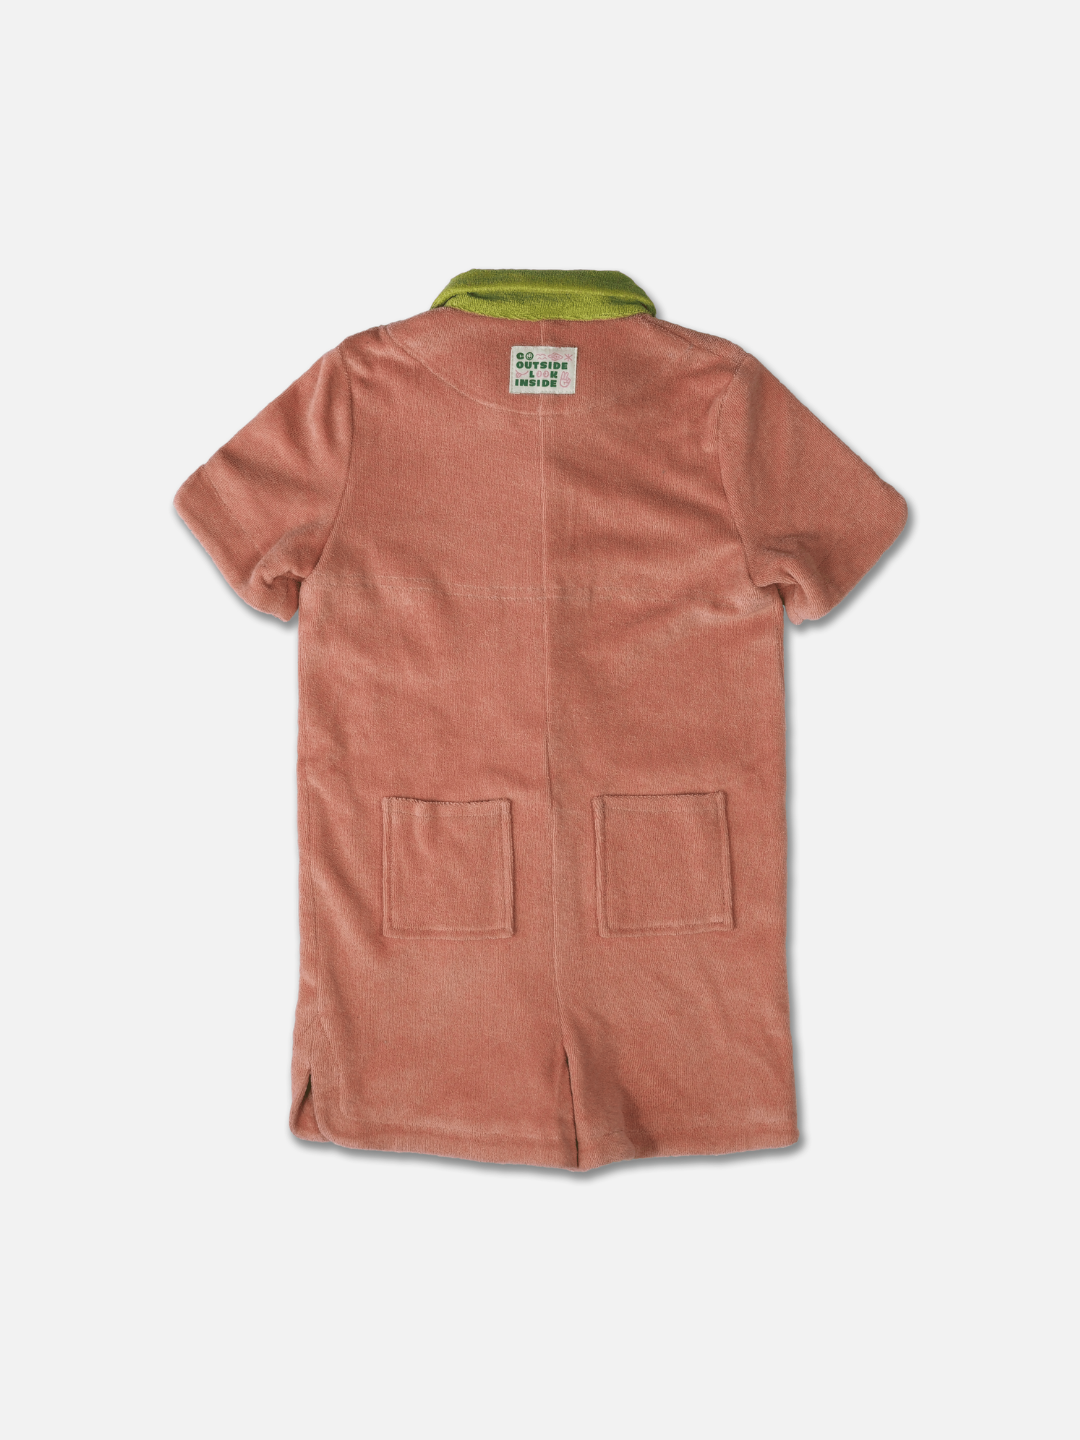 Rear view of a kids' jumpsuit in peach, with lime green collar and two back pockets